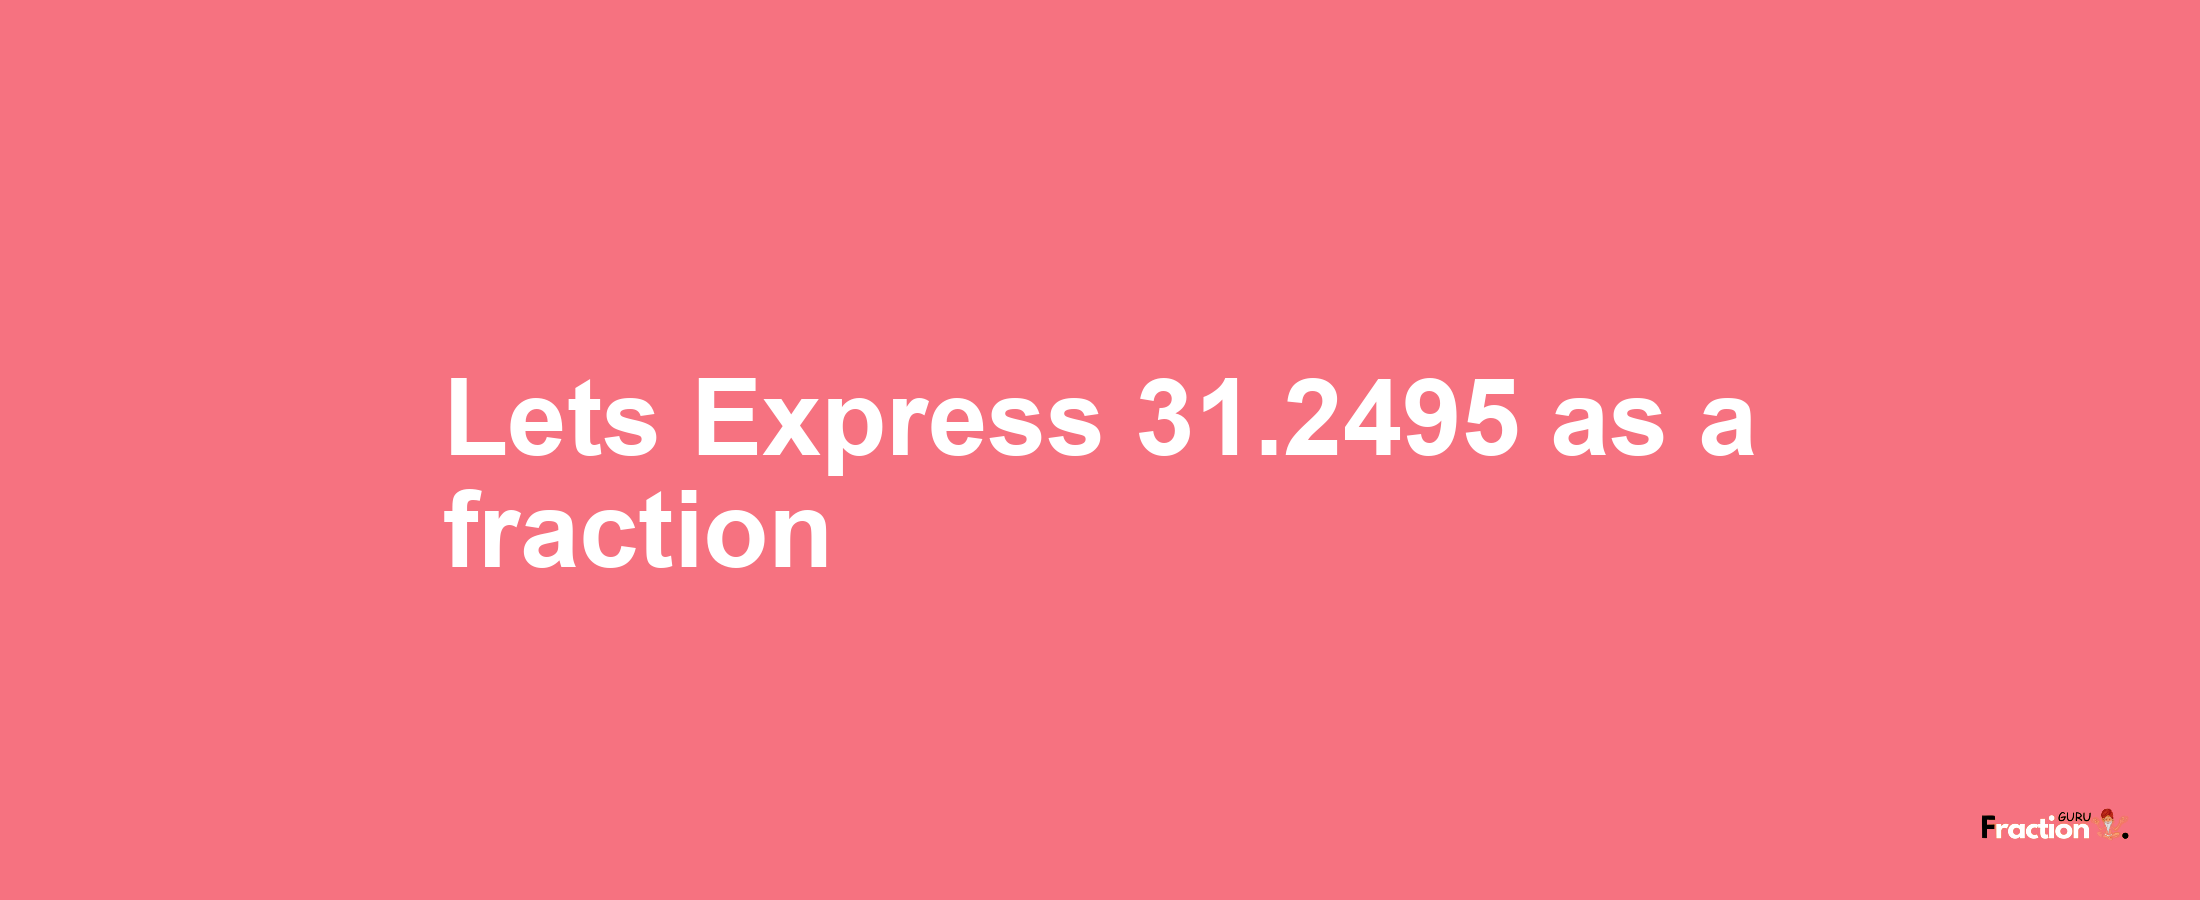 Lets Express 31.2495 as afraction